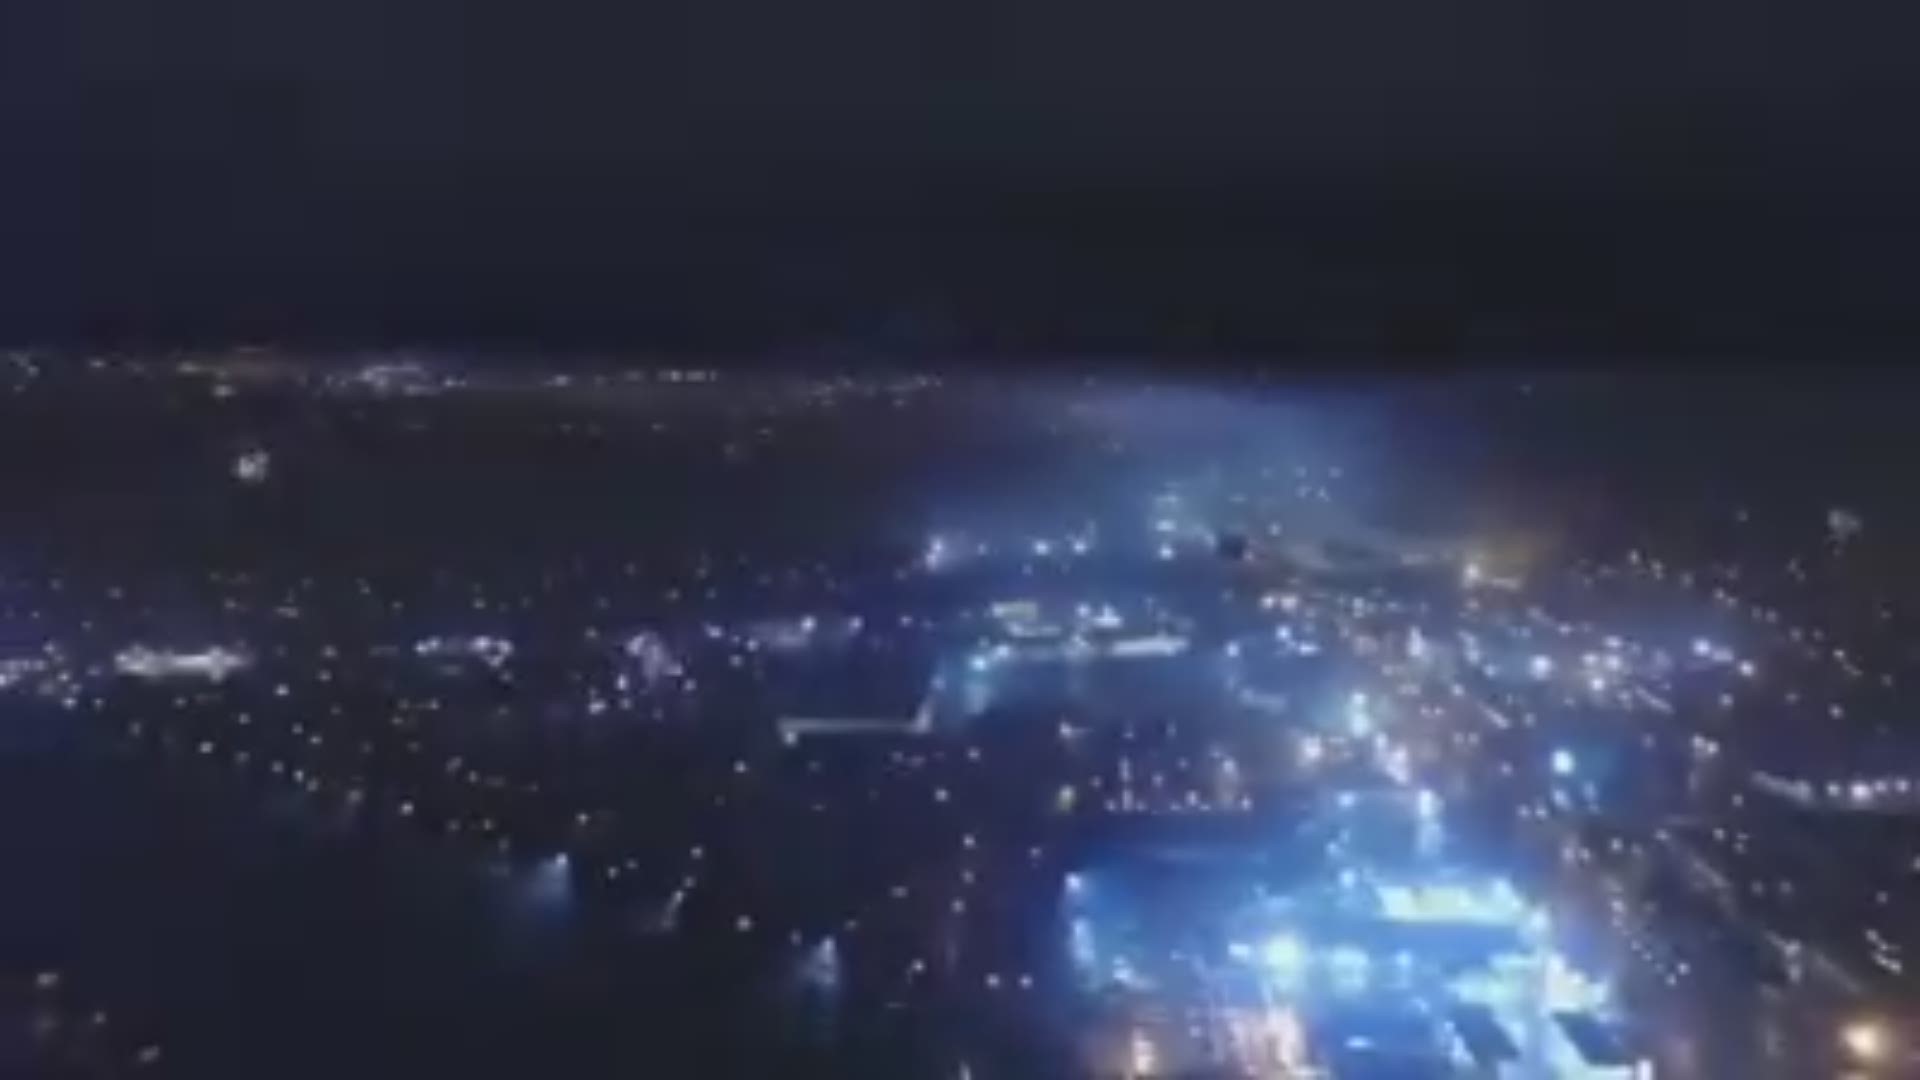 Watch what happens thirty seconds into the drone footage of New Orleans at midnight (courtesy of Andrew Morales).